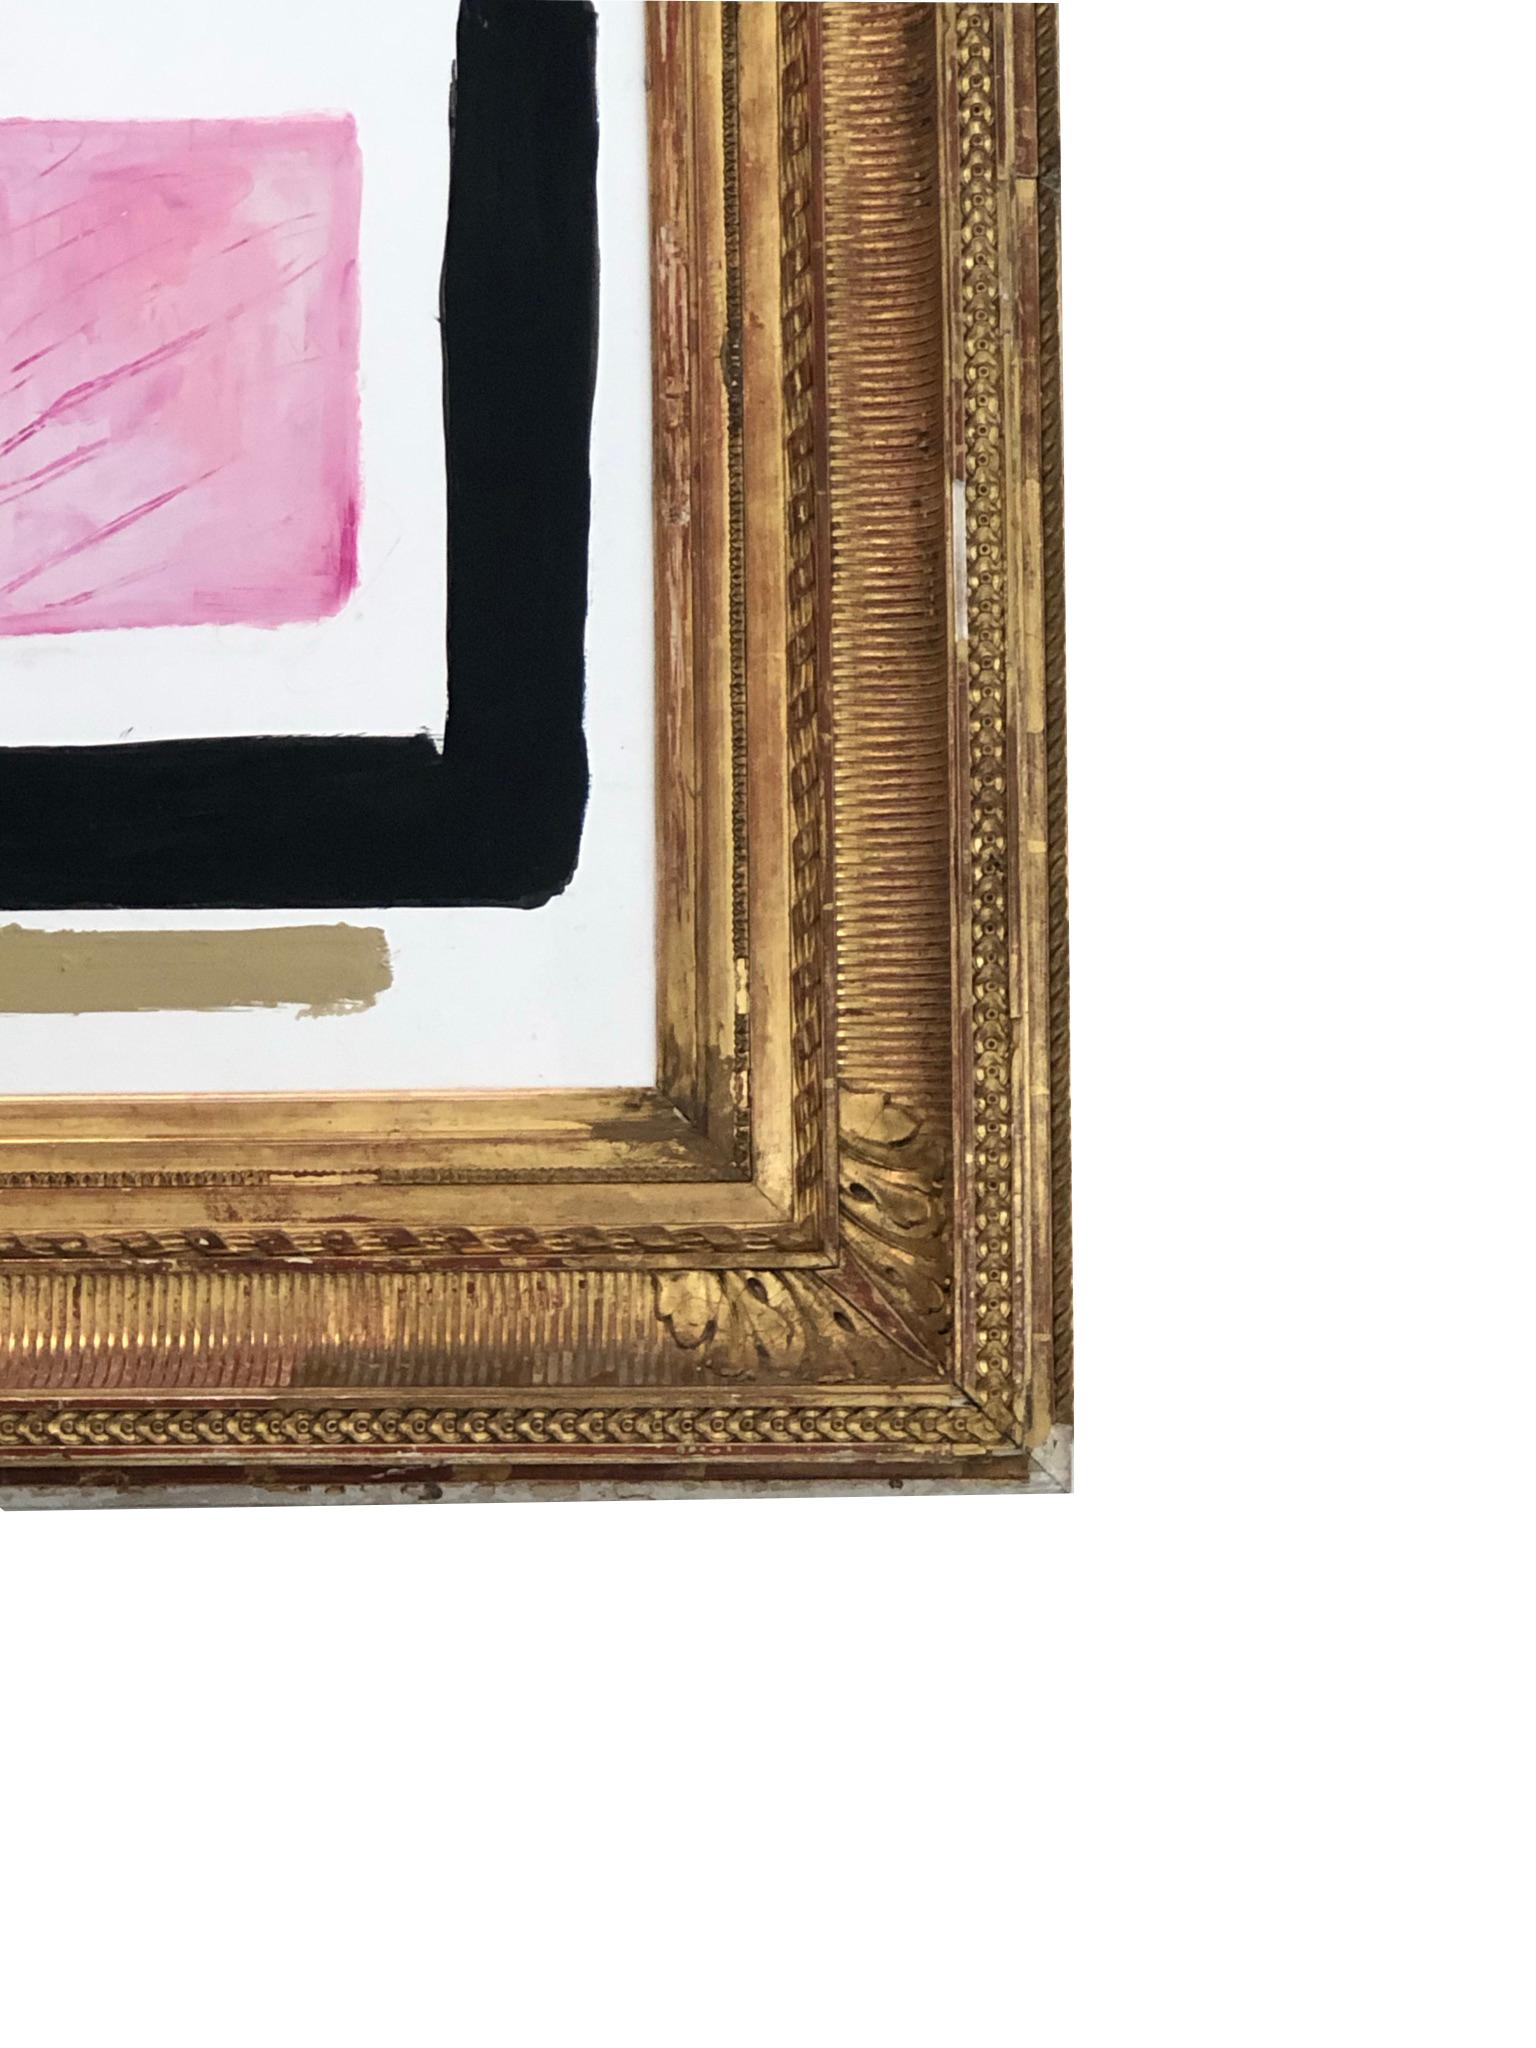 Beautiful modern painting on Venetian plaster treated canvas. The painting is abstract with pinks and blacks and a touch of gold. Frame is a beautiful example of an 18th century gilt and gesso plaster frame. The painting is from artist B. Jones.